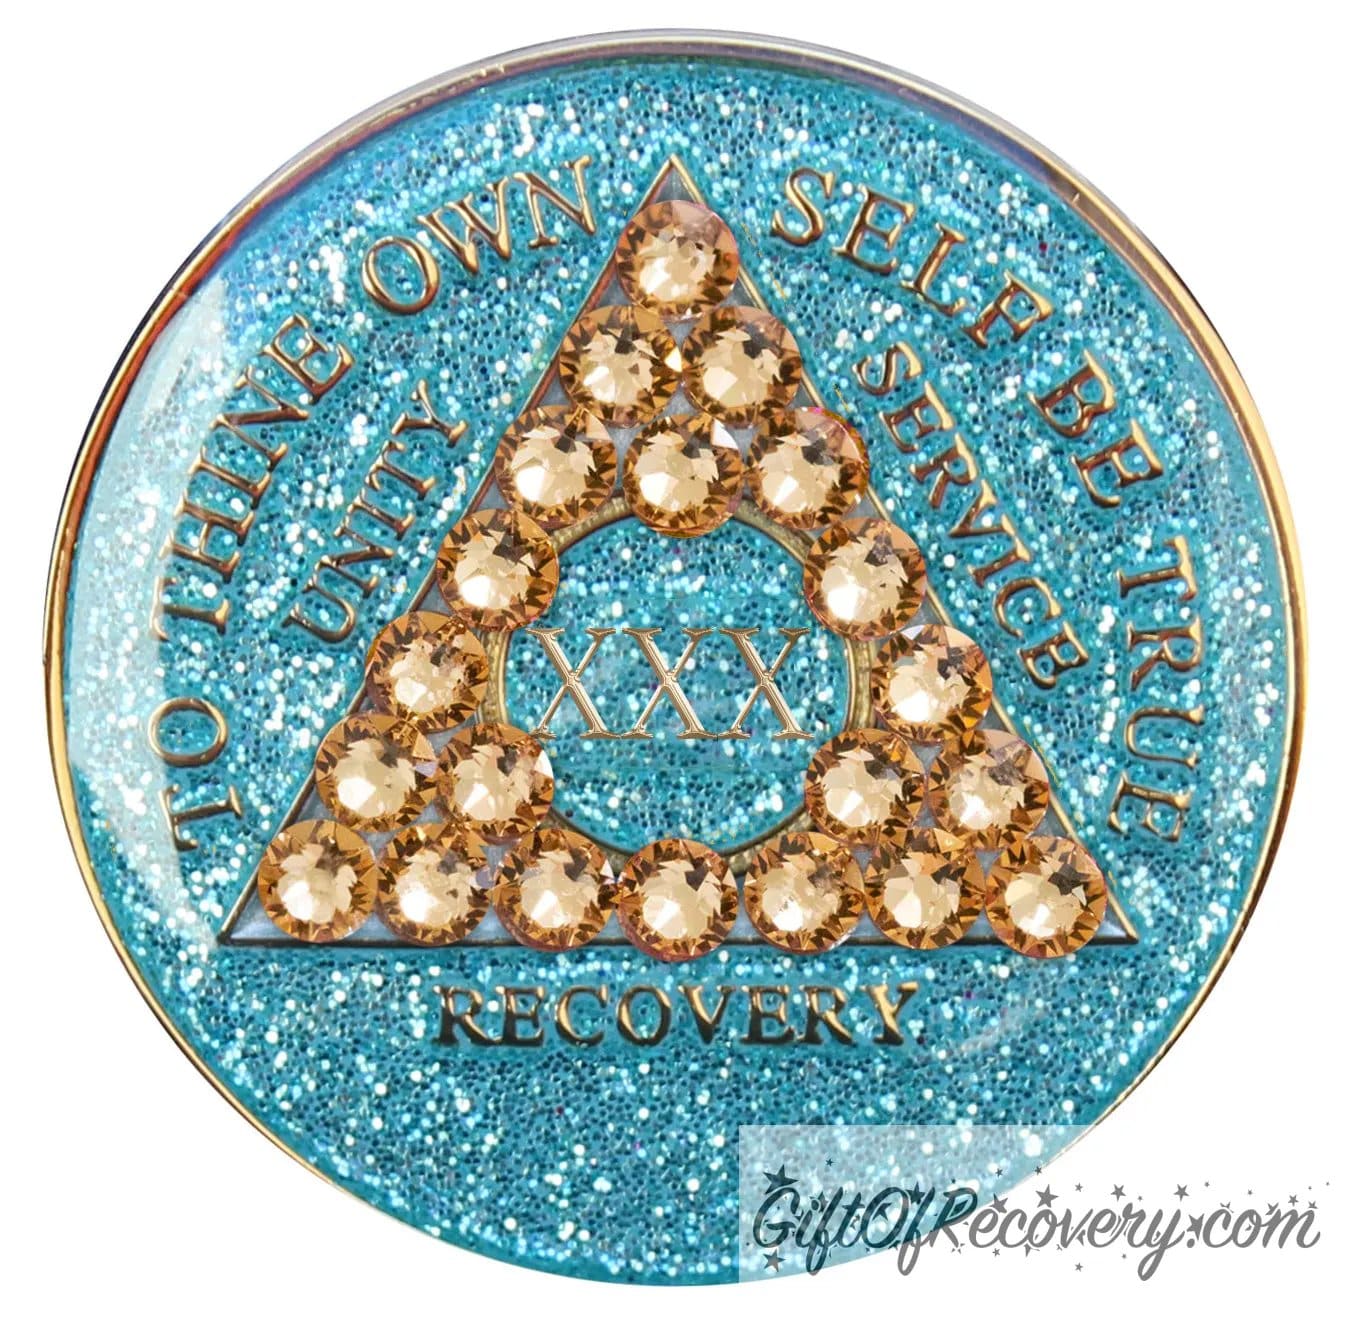 30 year Aqua glitter AA medallion with 21 gold genuine crystal making a triangle in the center, and to thine own self be true, unity, service, recovery, the roman numeral in the center and the rim of the recovery medallion embossed in 14k gold plated brass and sealed with resin for a glossy shine.